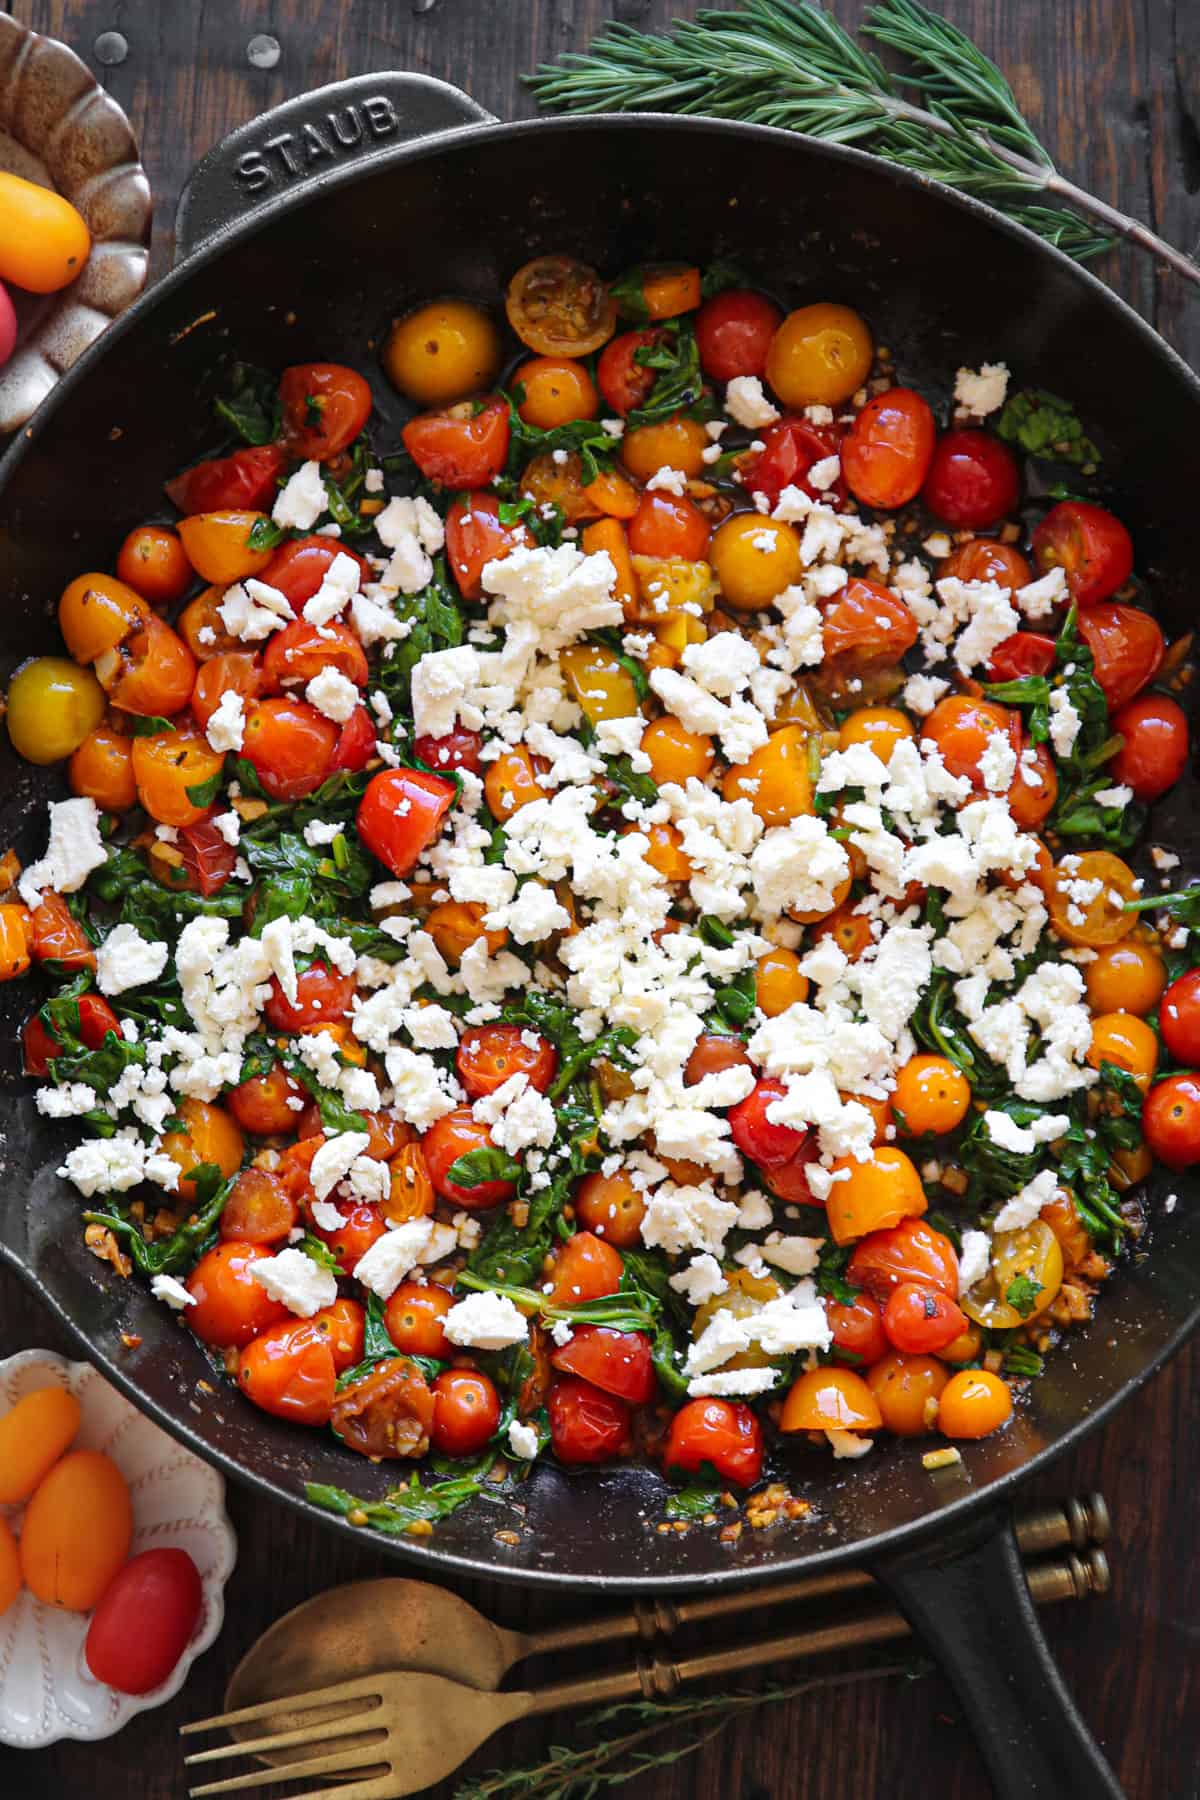 cooked cherry tomatoes with spinach and crumbled feta cheese - in a cast iron skillet.